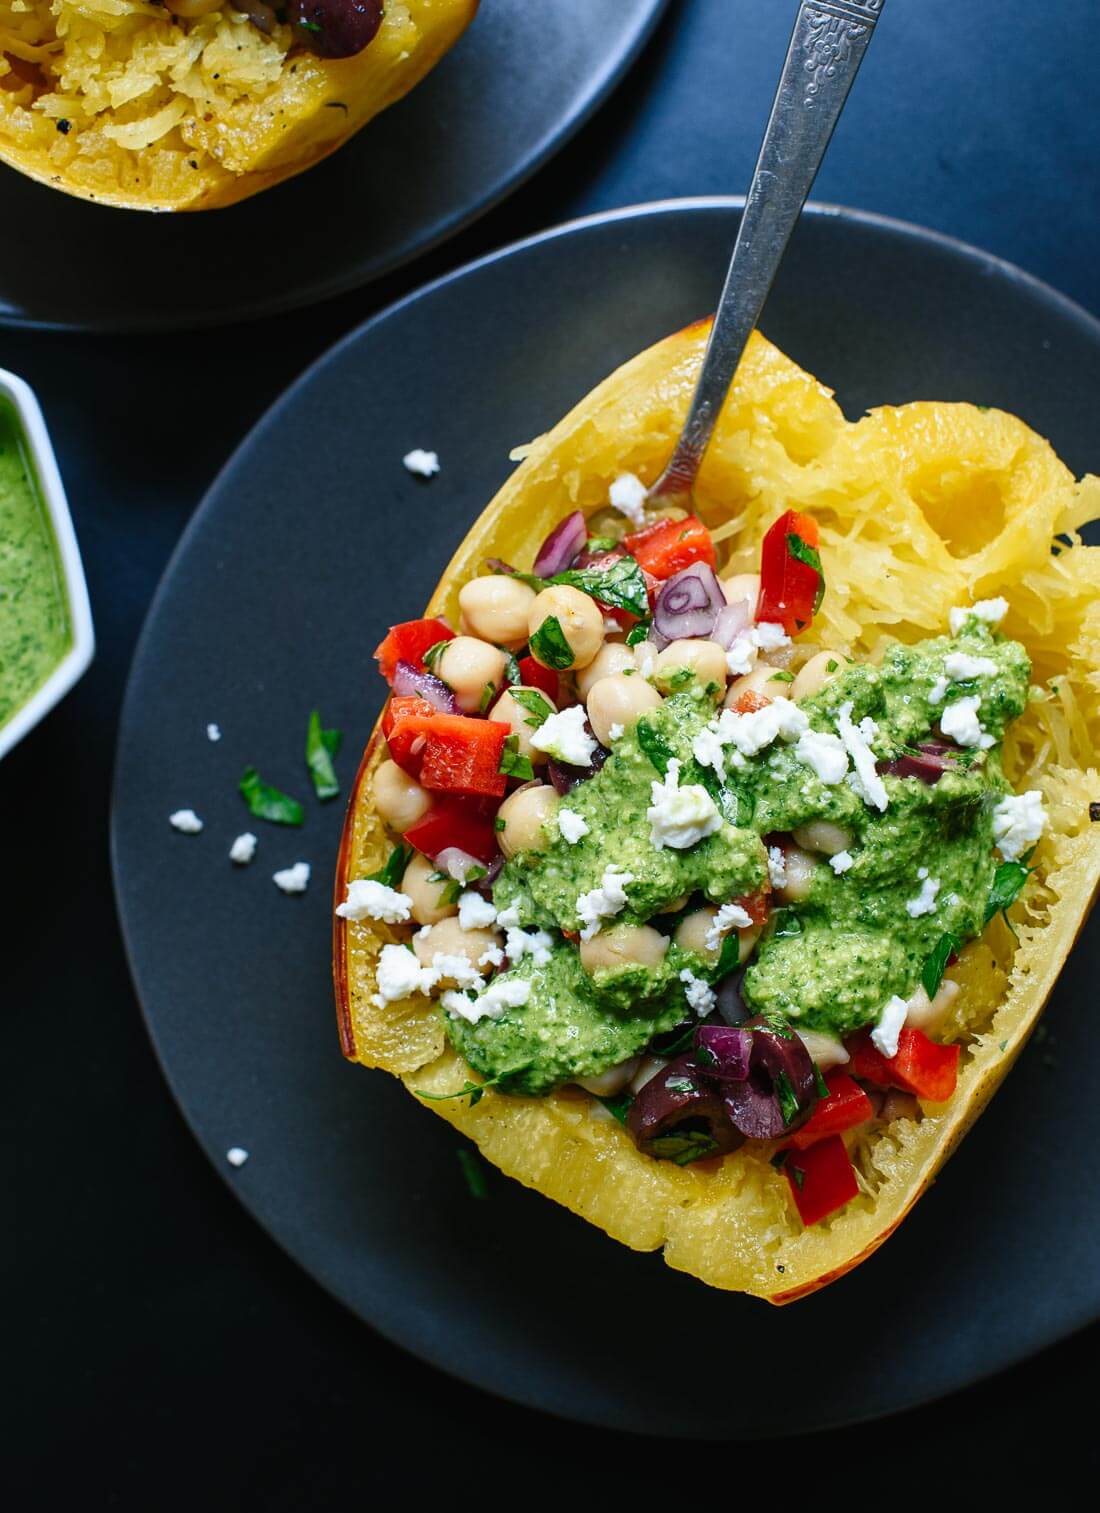 This healthy spaghetti squash recipe features your favorite Mediterranean ingredients, including pesto! It's a great fall dinner. cookieandkate.com